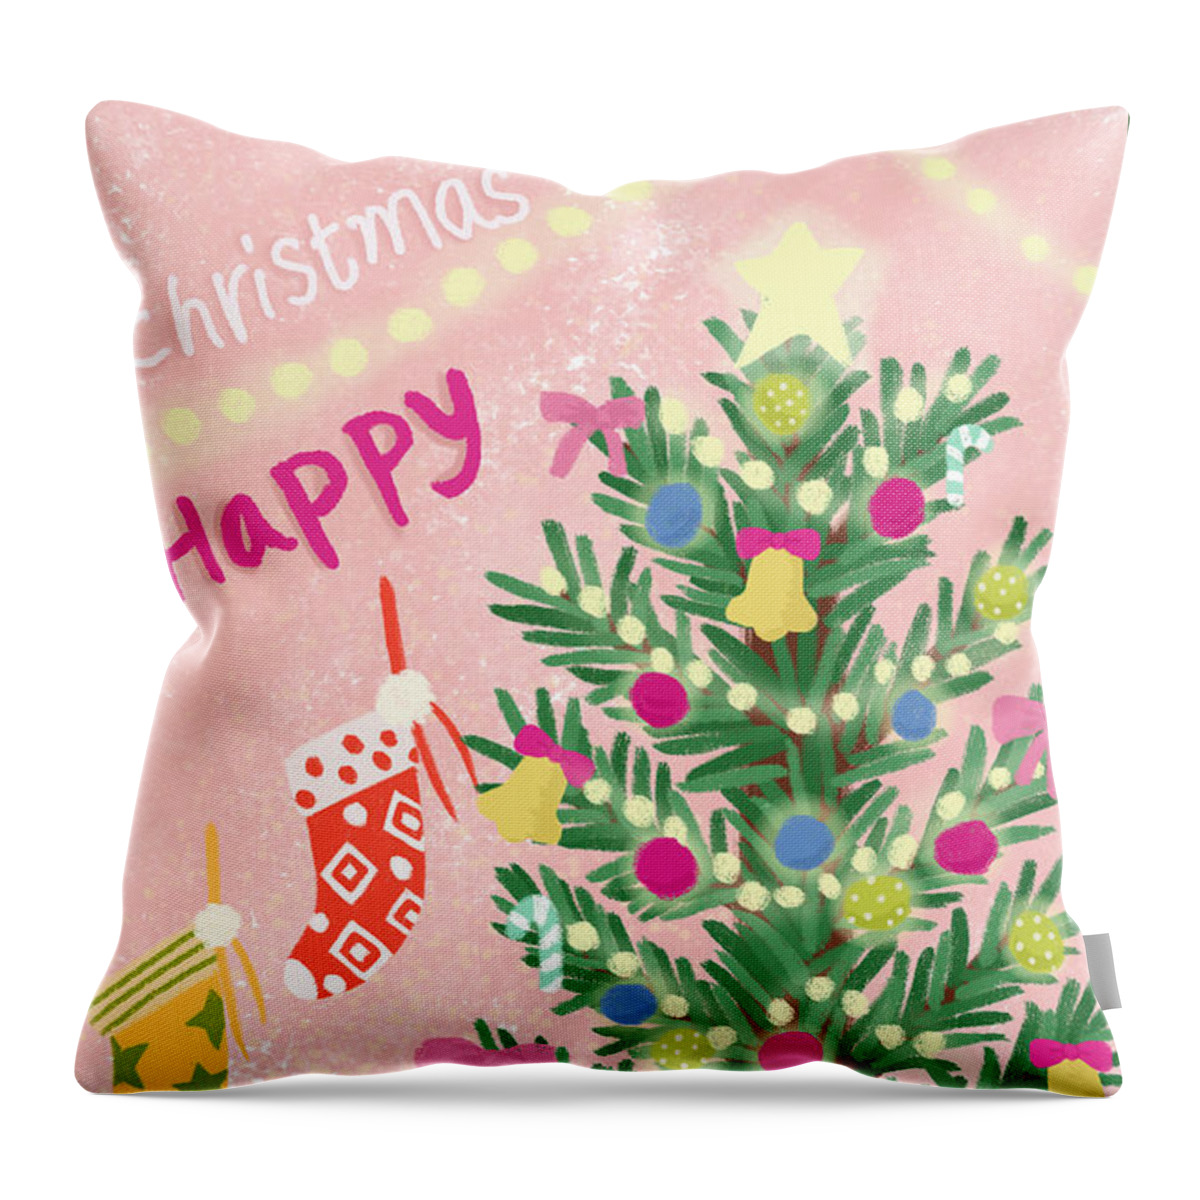 Christmas Throw Pillow featuring the drawing Happy Christmas by Min fen Zhu